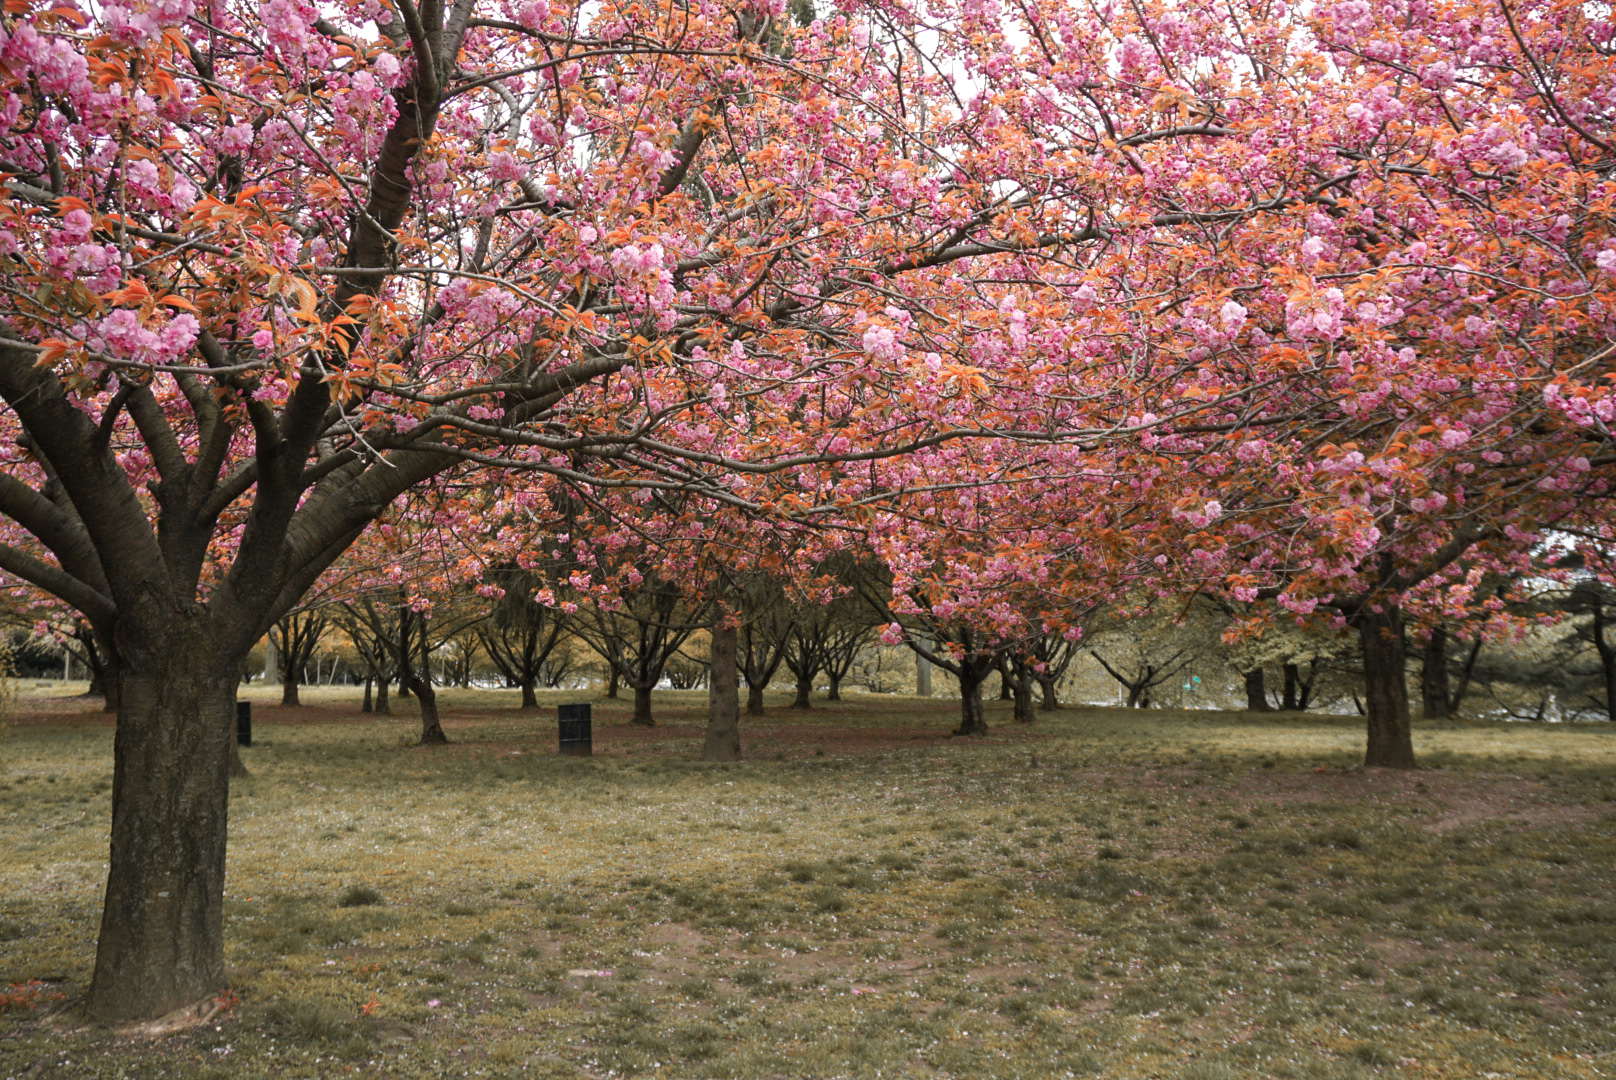 14 STUNNING Places to See Cherry Blossoms in NYC - Your Brooklyn Guide